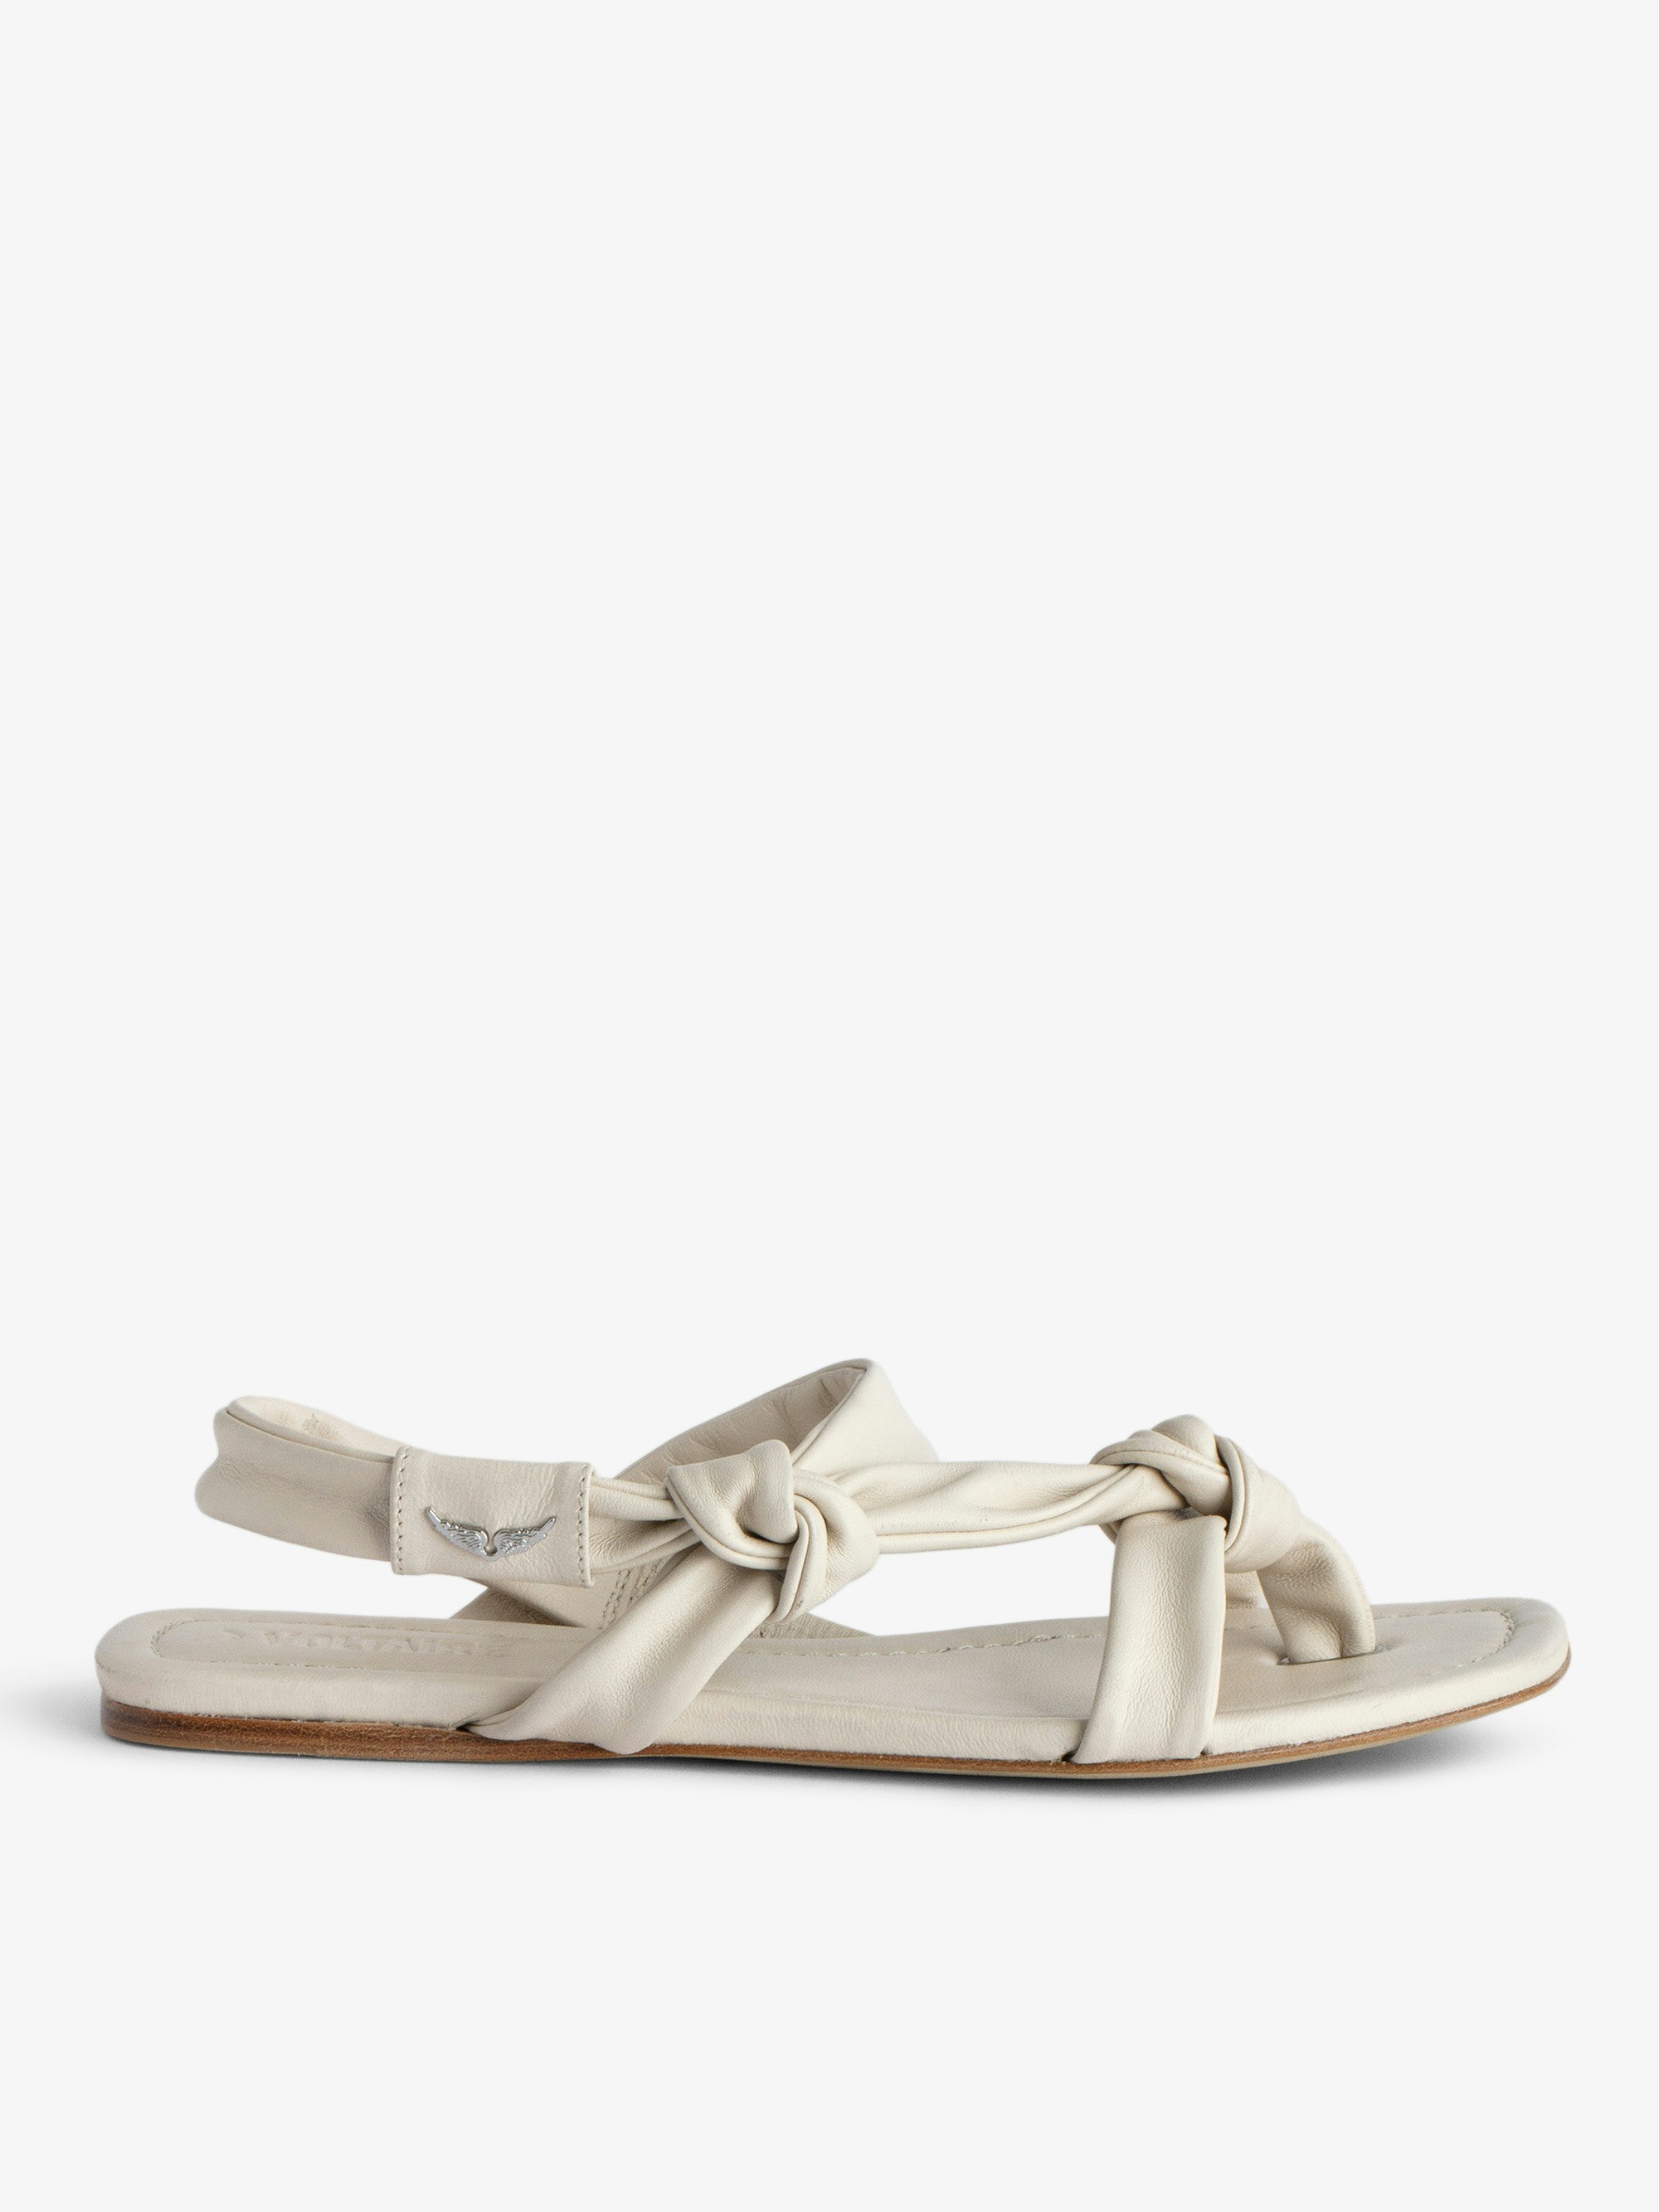 Forget Me Knot Sandals - Women's white  flat leather sandals with wing motifs.